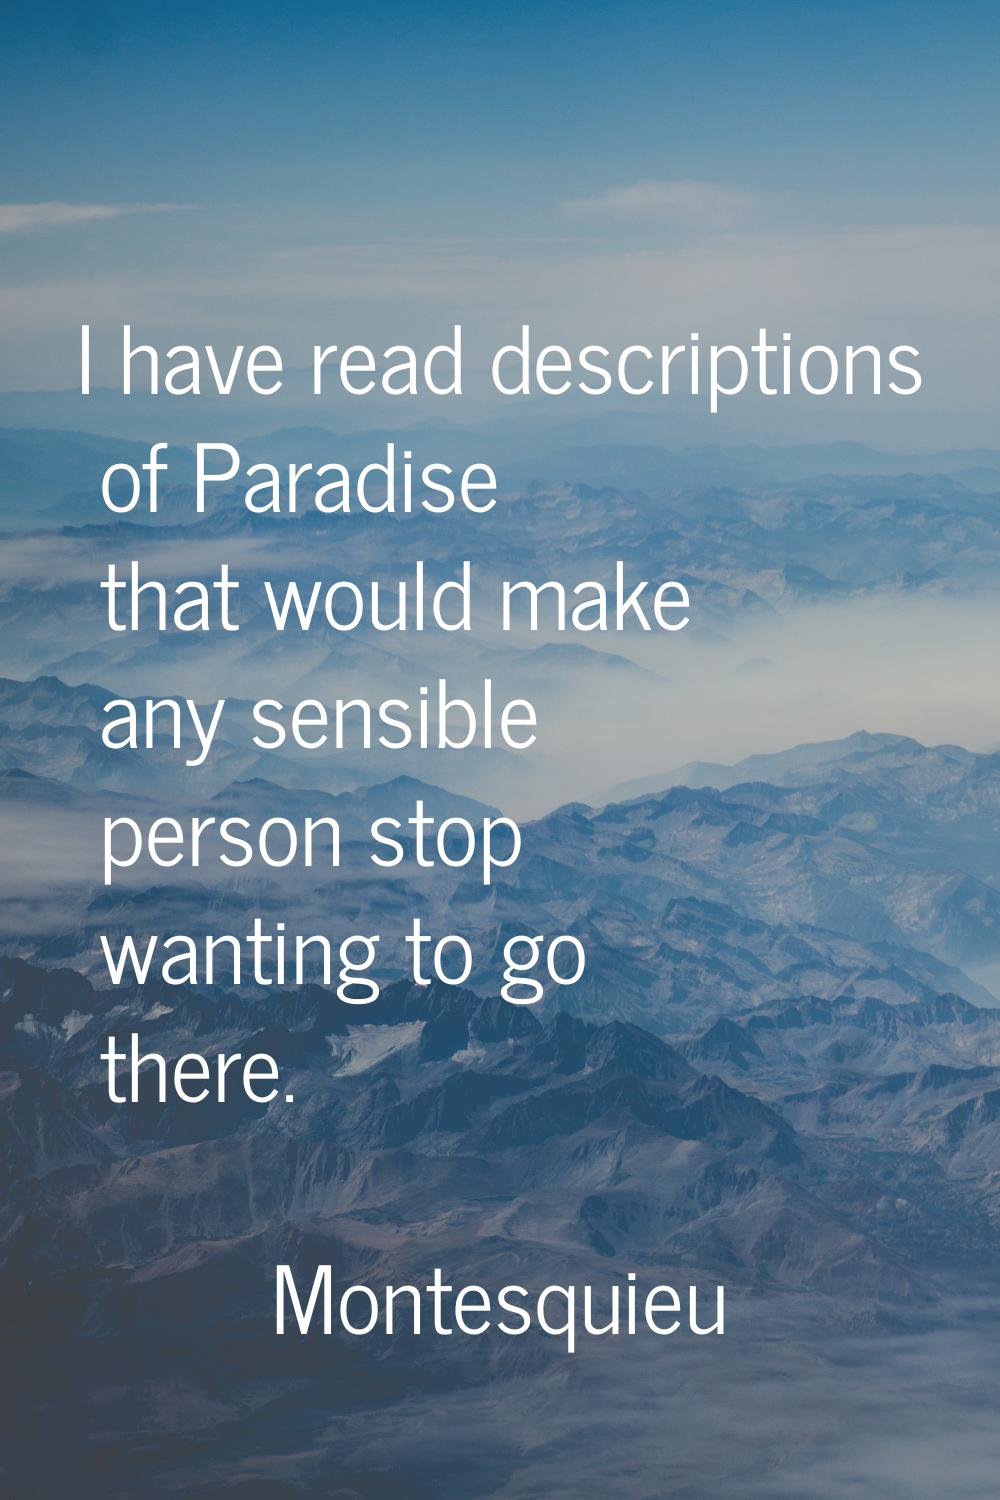 I have read descriptions of Paradise that would make any sensible person stop wanting to go there.